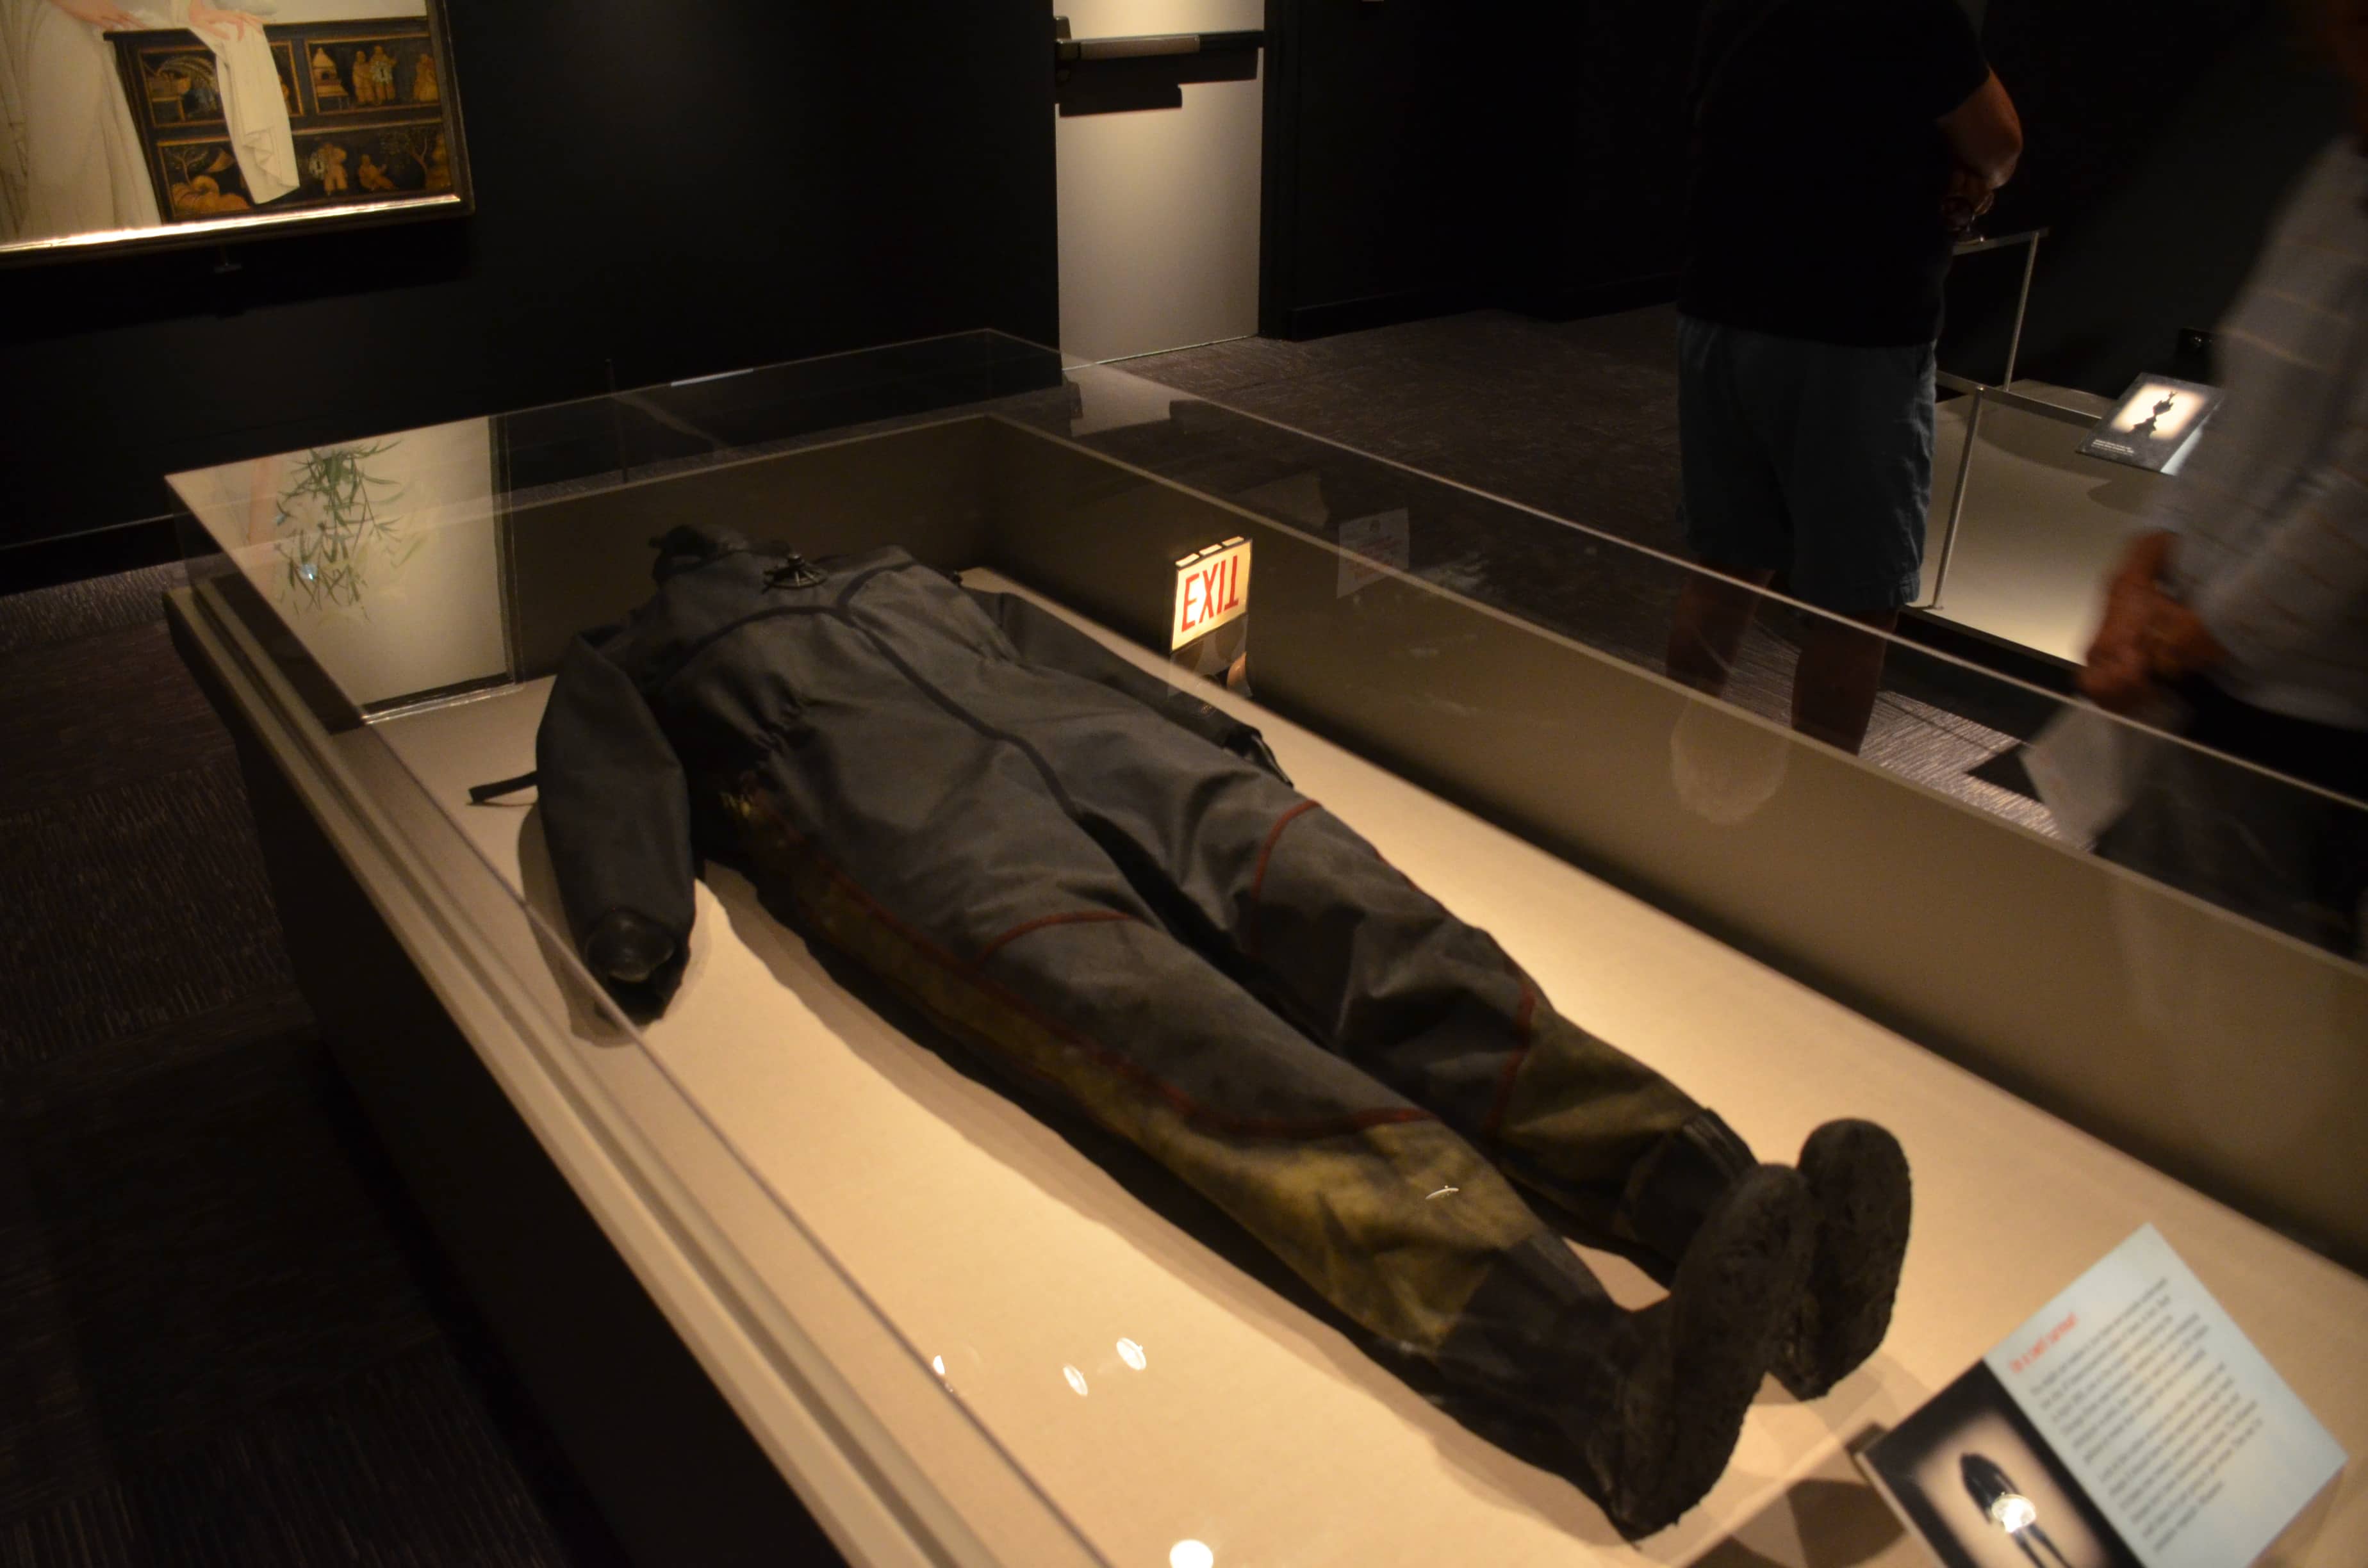 Wetsuit from the Great Chicago Flood at the Chicago History Museum